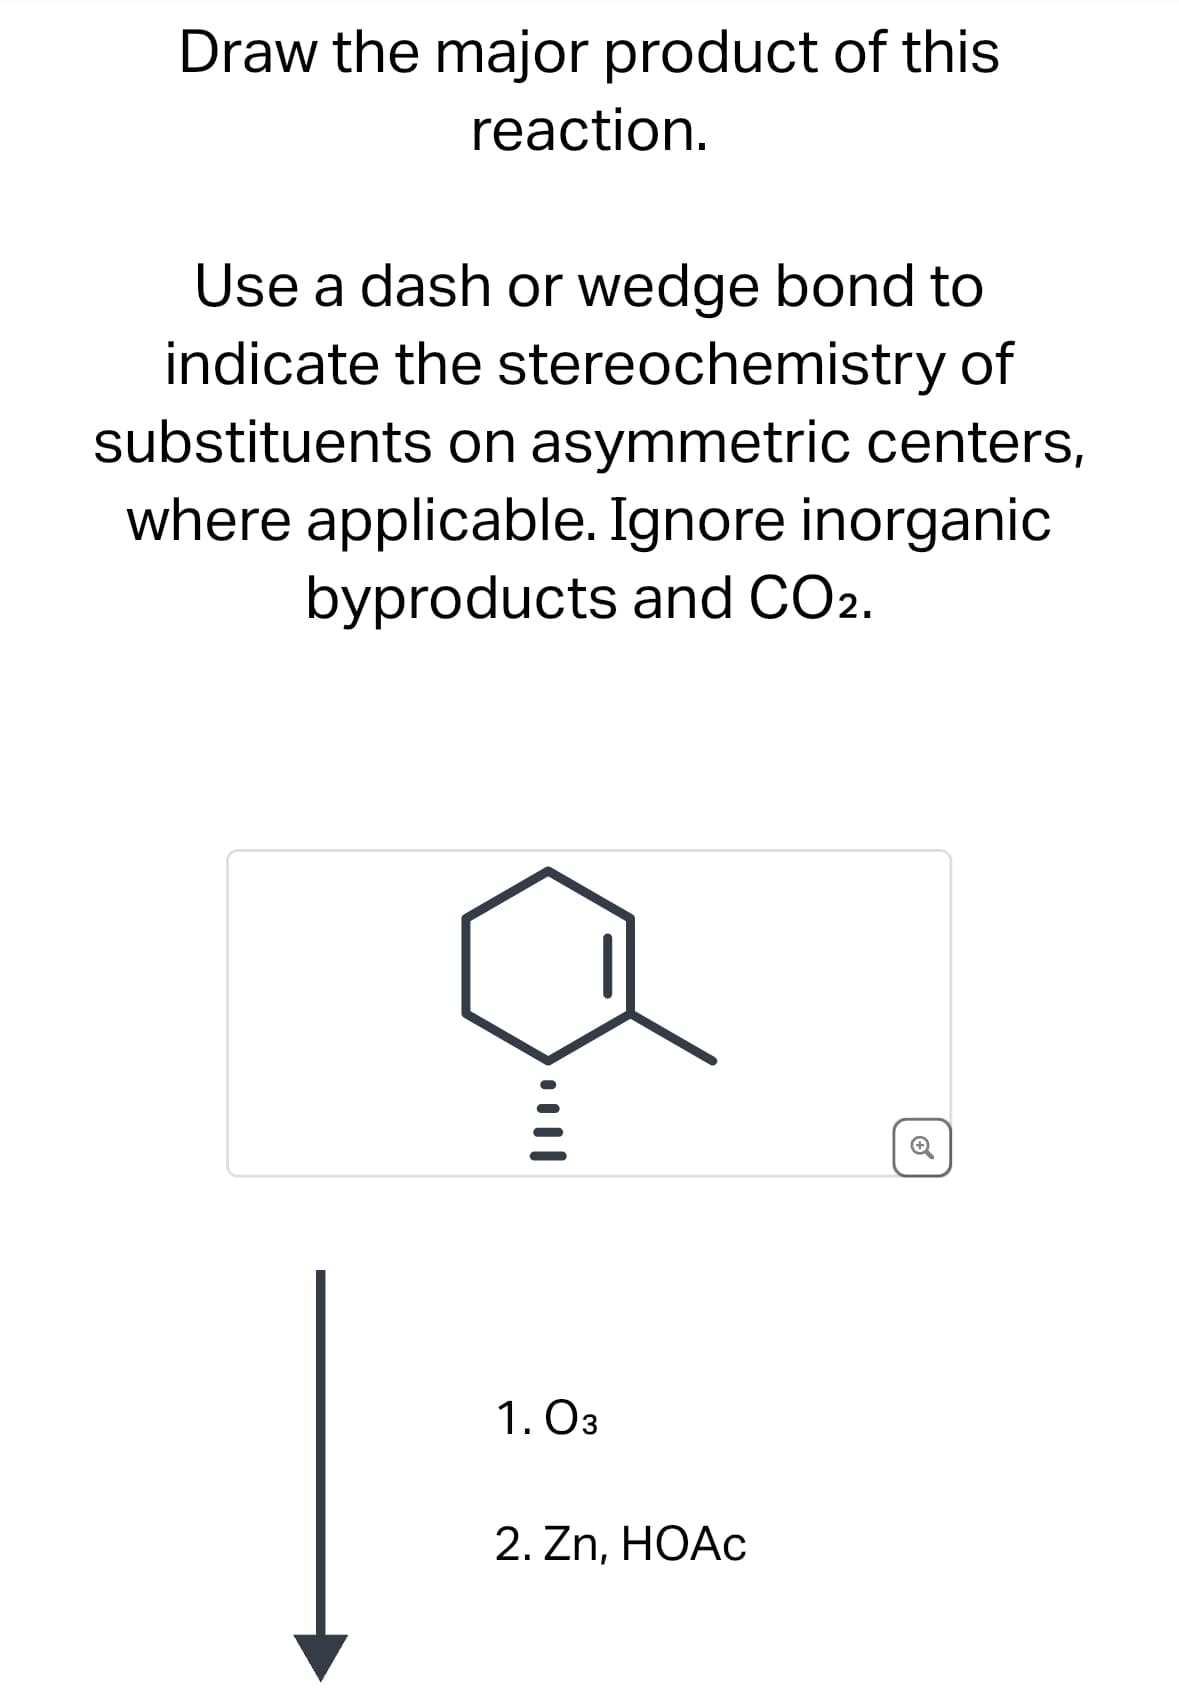 Draw the major product of this
reaction.
Use a dash or wedge bond to
indicate the stereochemistry of
substituents on asymmetric centers,
where applicable. Ignore inorganic
byproducts and CO2.
1. 03
2. Zn, HOAC
+